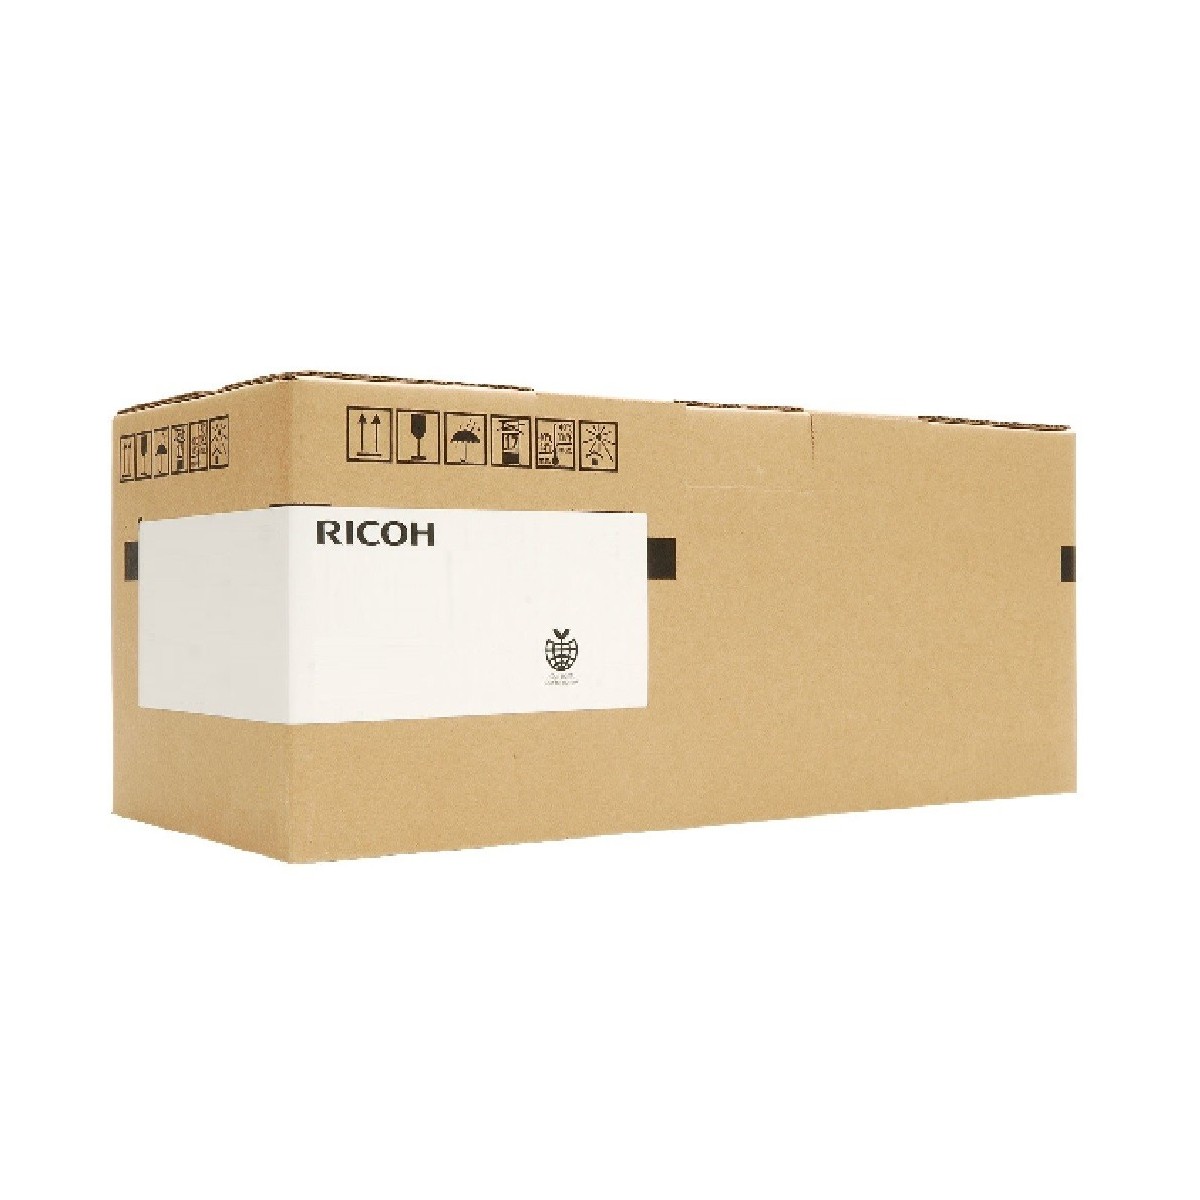 Ricoh D1882264 - Original - Ricoh - MP C2003 MP C2003G MP C2003SP MP C2003ZSP MP C2004 - 1 pc(s) - 48000 pages - Cyan - Magenta 